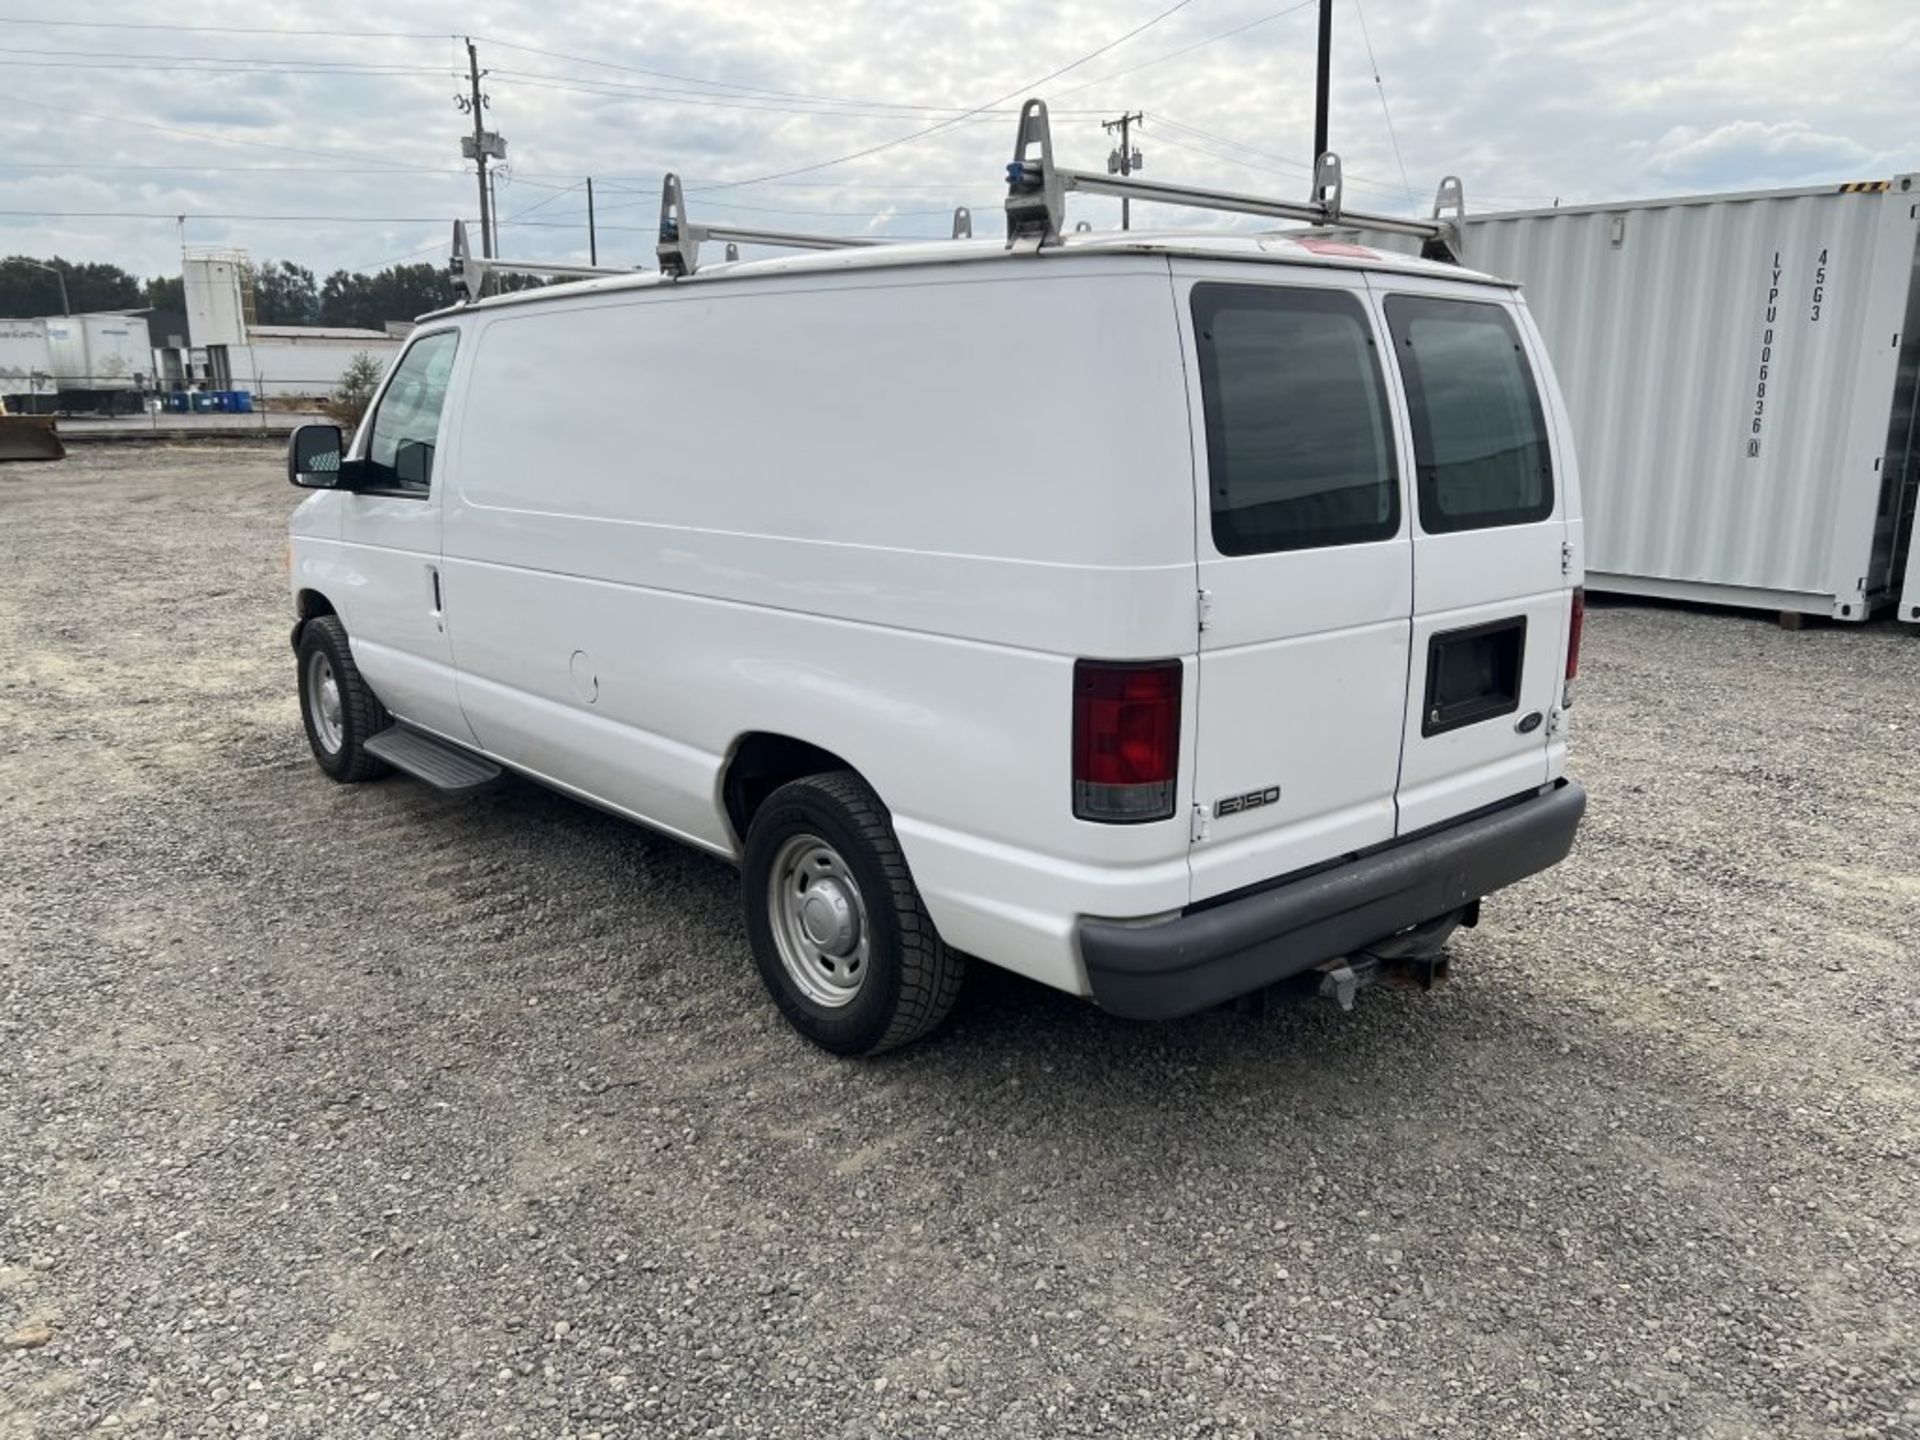 2006 Ford E150 Cargo Van - Image 6 of 21